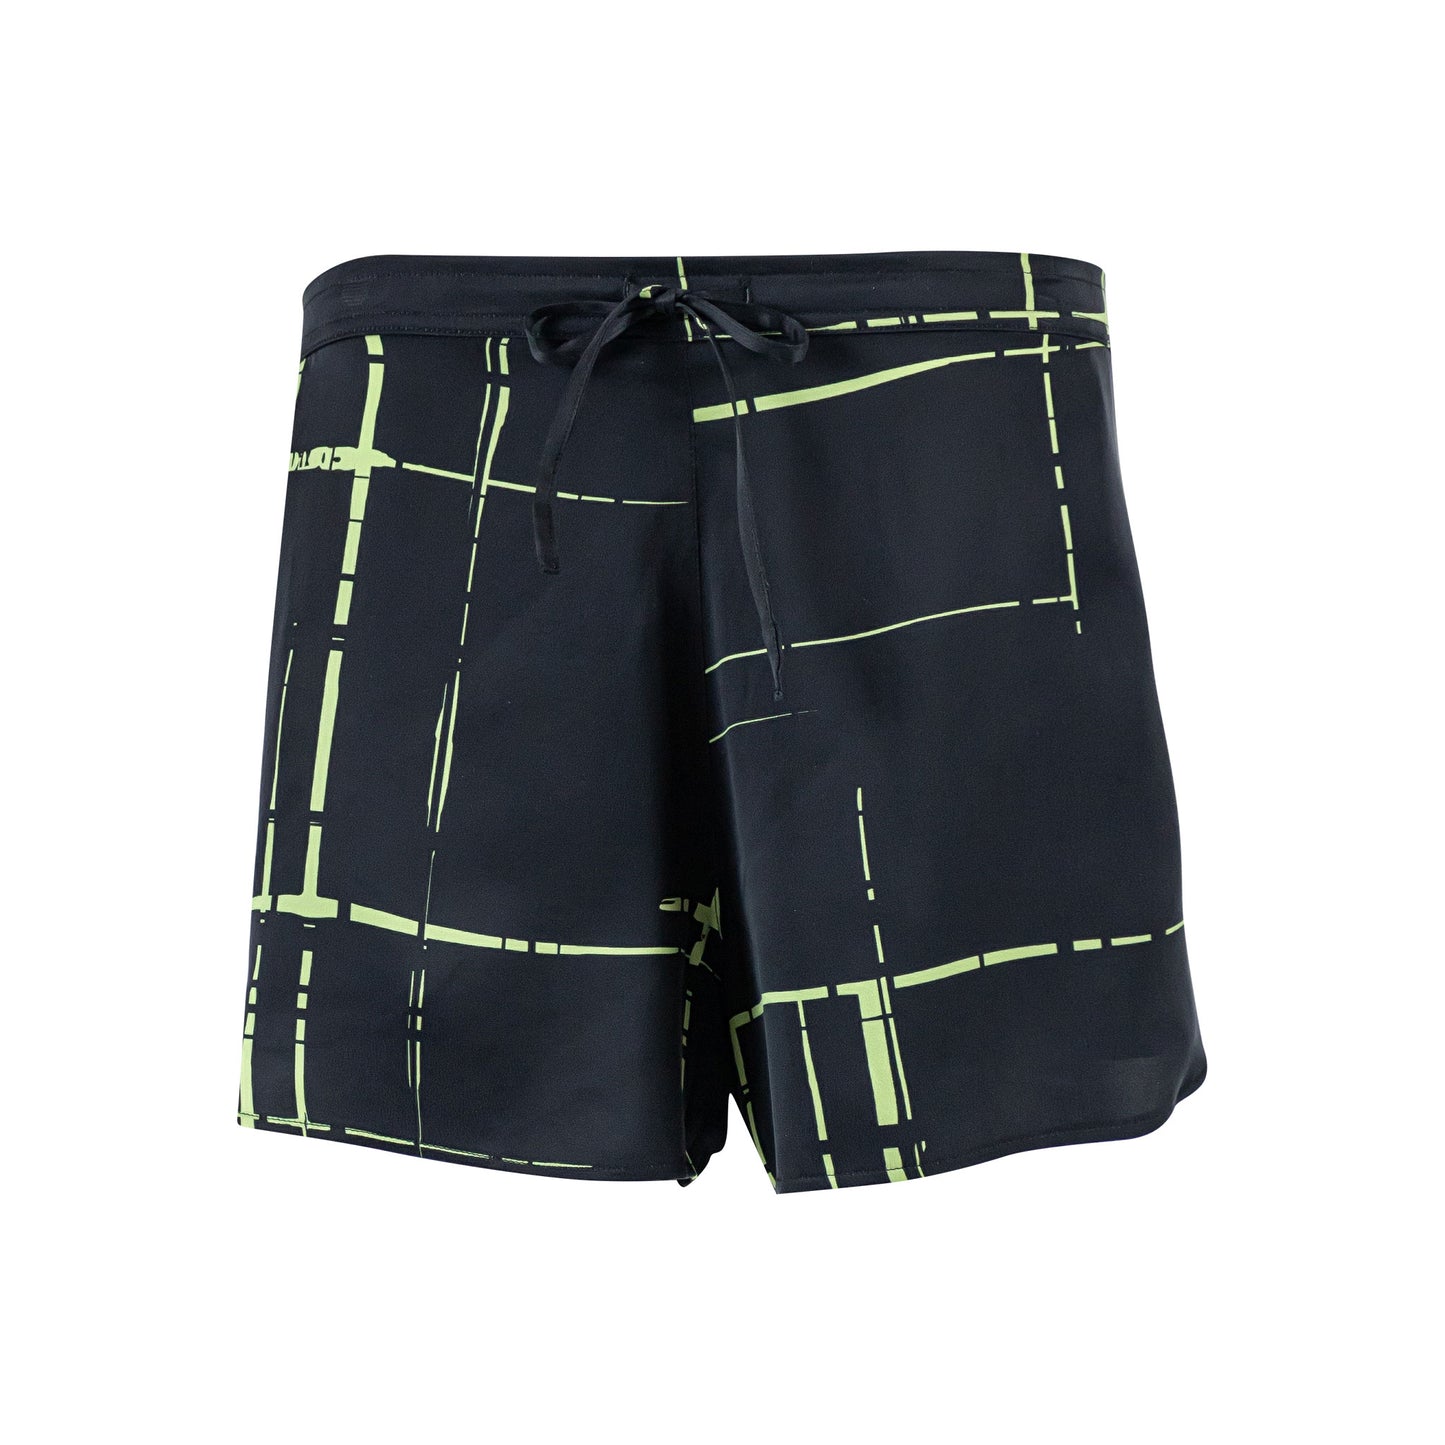 Silk Dreamscape Shorts. All garments are cold-washed. Machine-washing friendly.